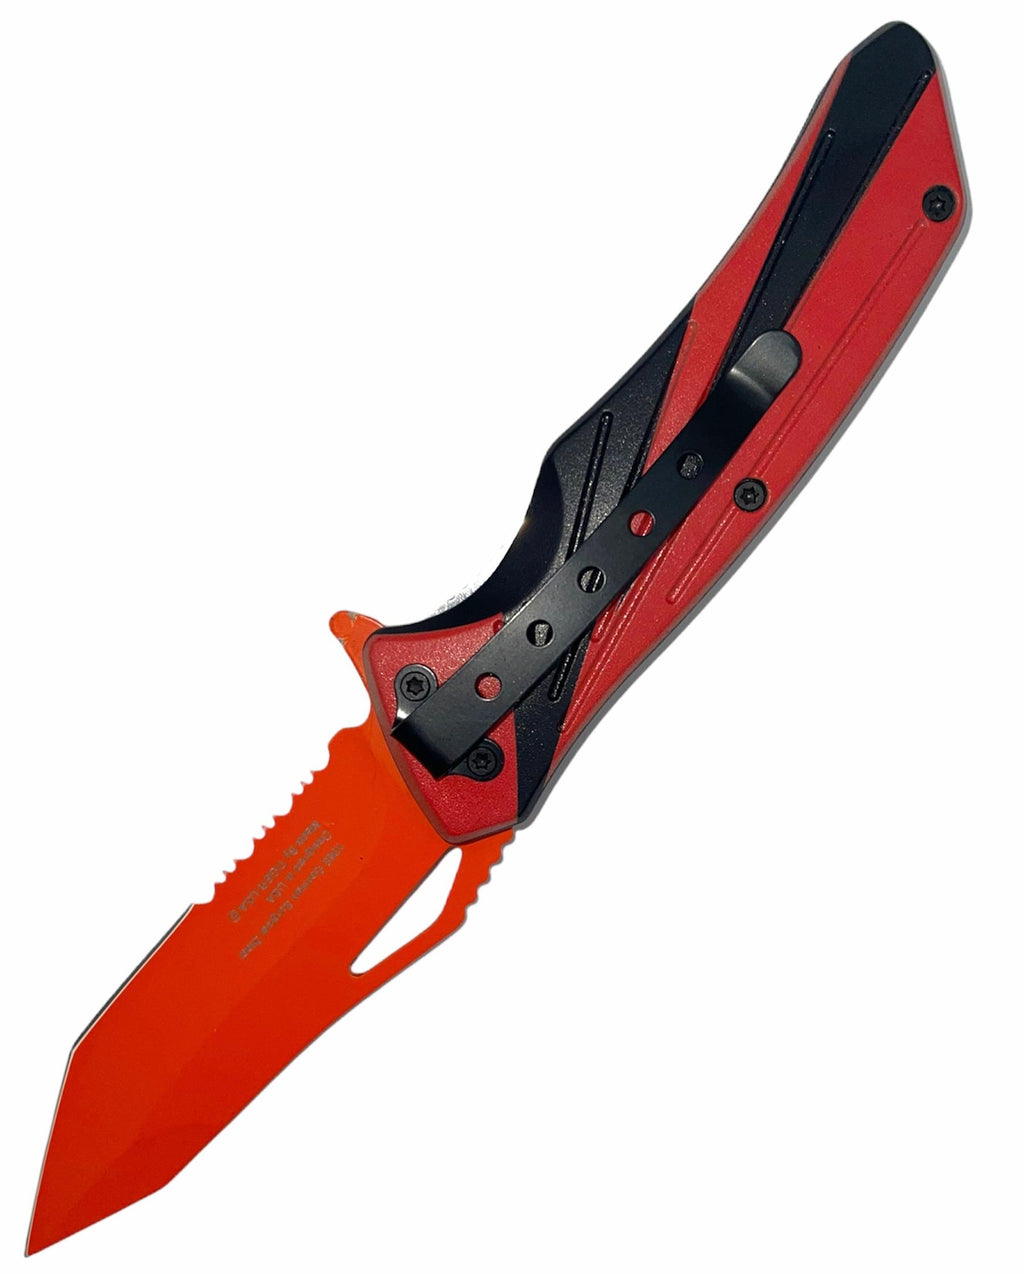 Tiger USA Spring Assisted Knife  RED and BlackTanto